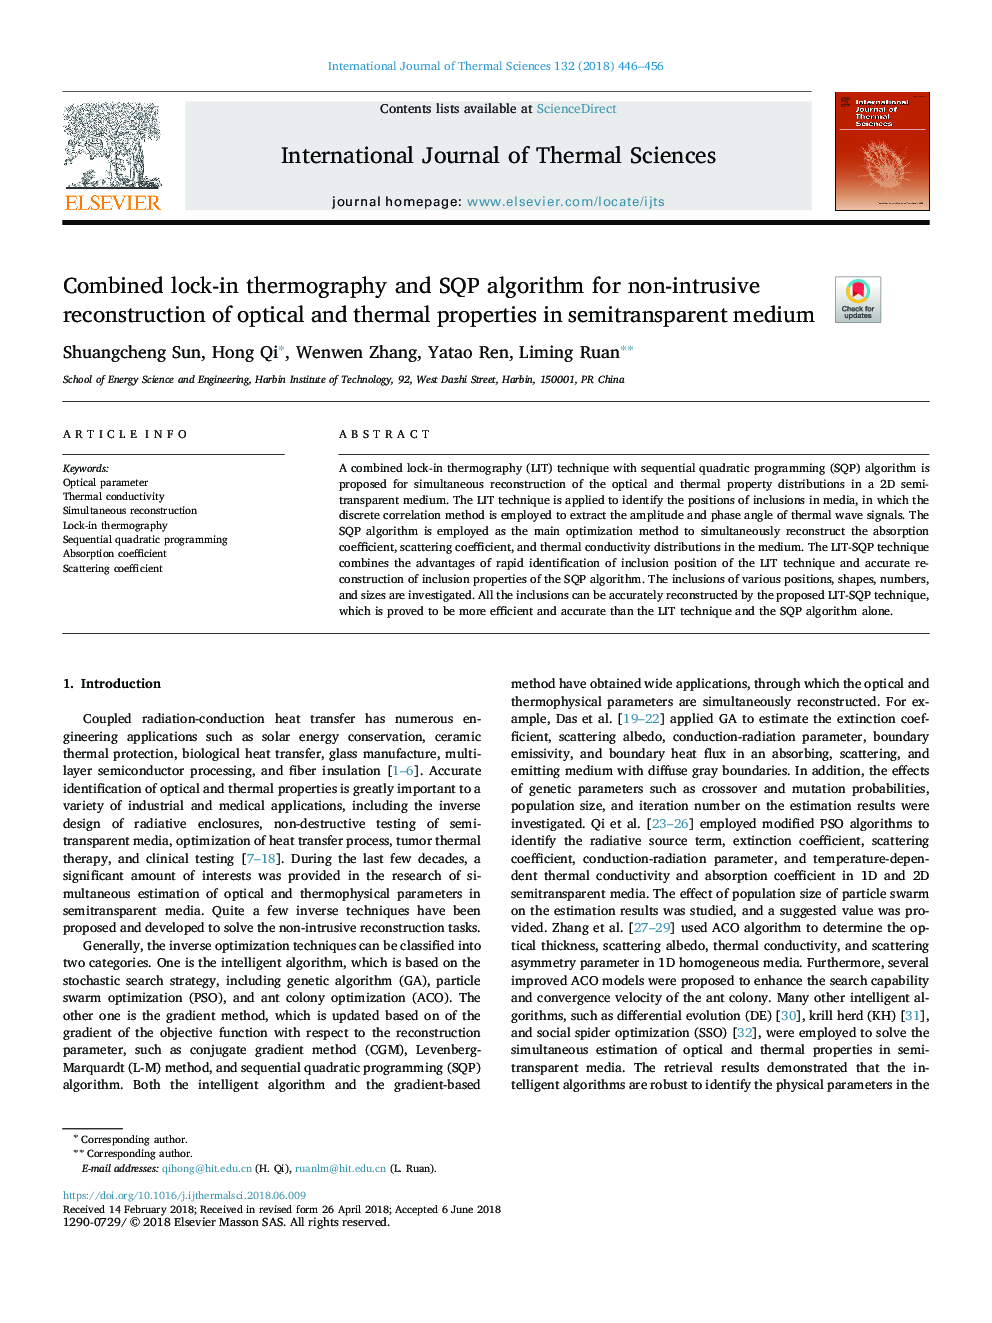 Combined lock-in thermography and SQP algorithm for non-intrusive reconstruction of optical and thermal properties in semitransparent medium